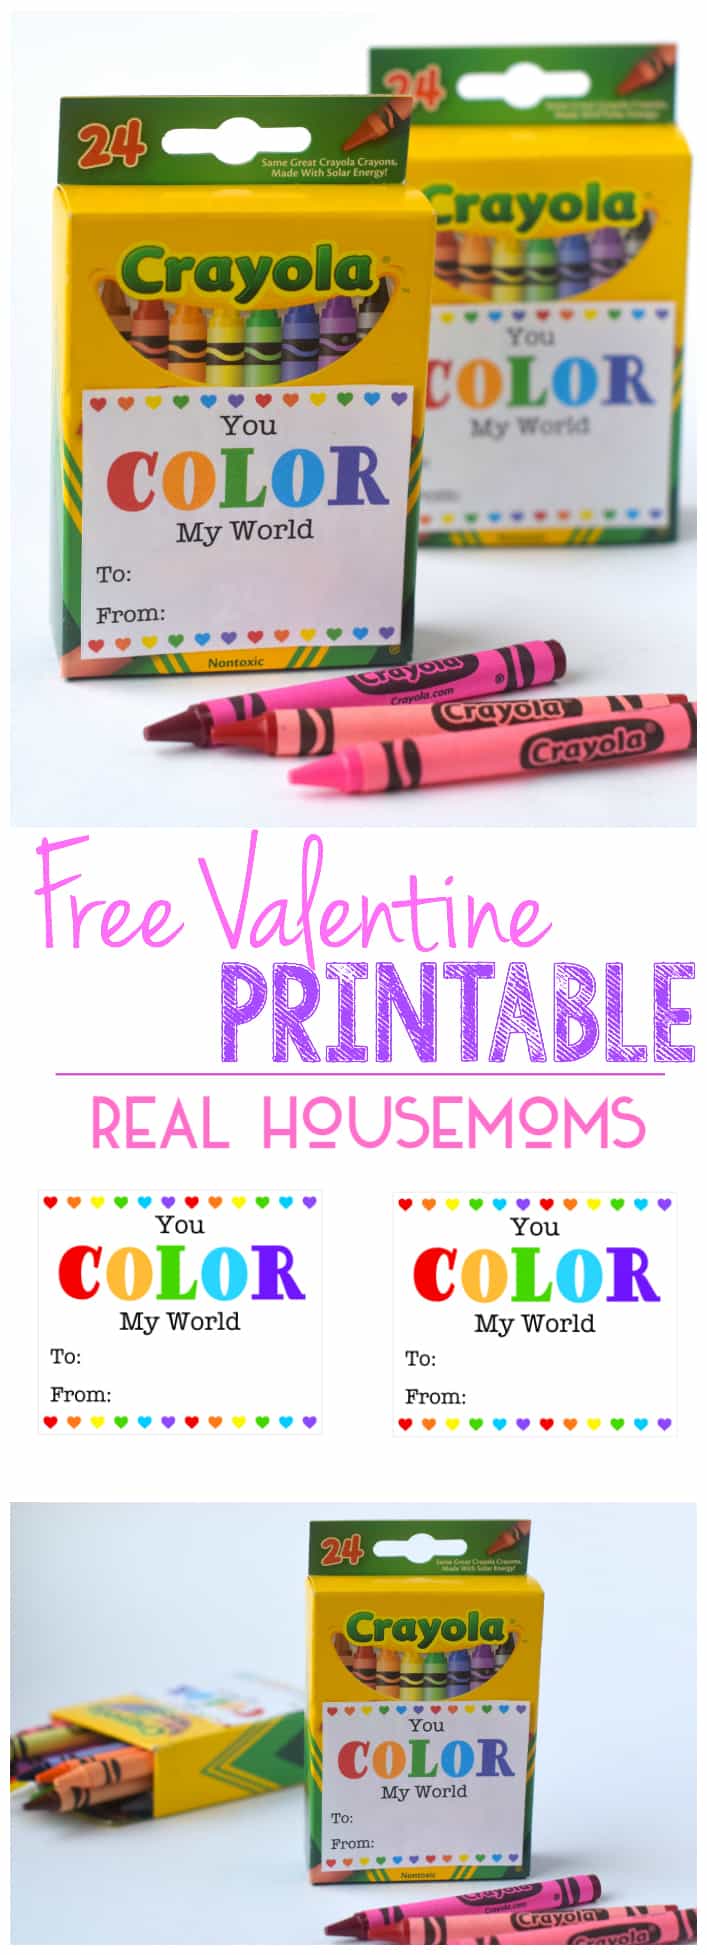 This super cute FREE PRINTABLE VALENTINE makes creating Valentine's for a class a snap! Some boxes of crayons, some scissors and you're done!